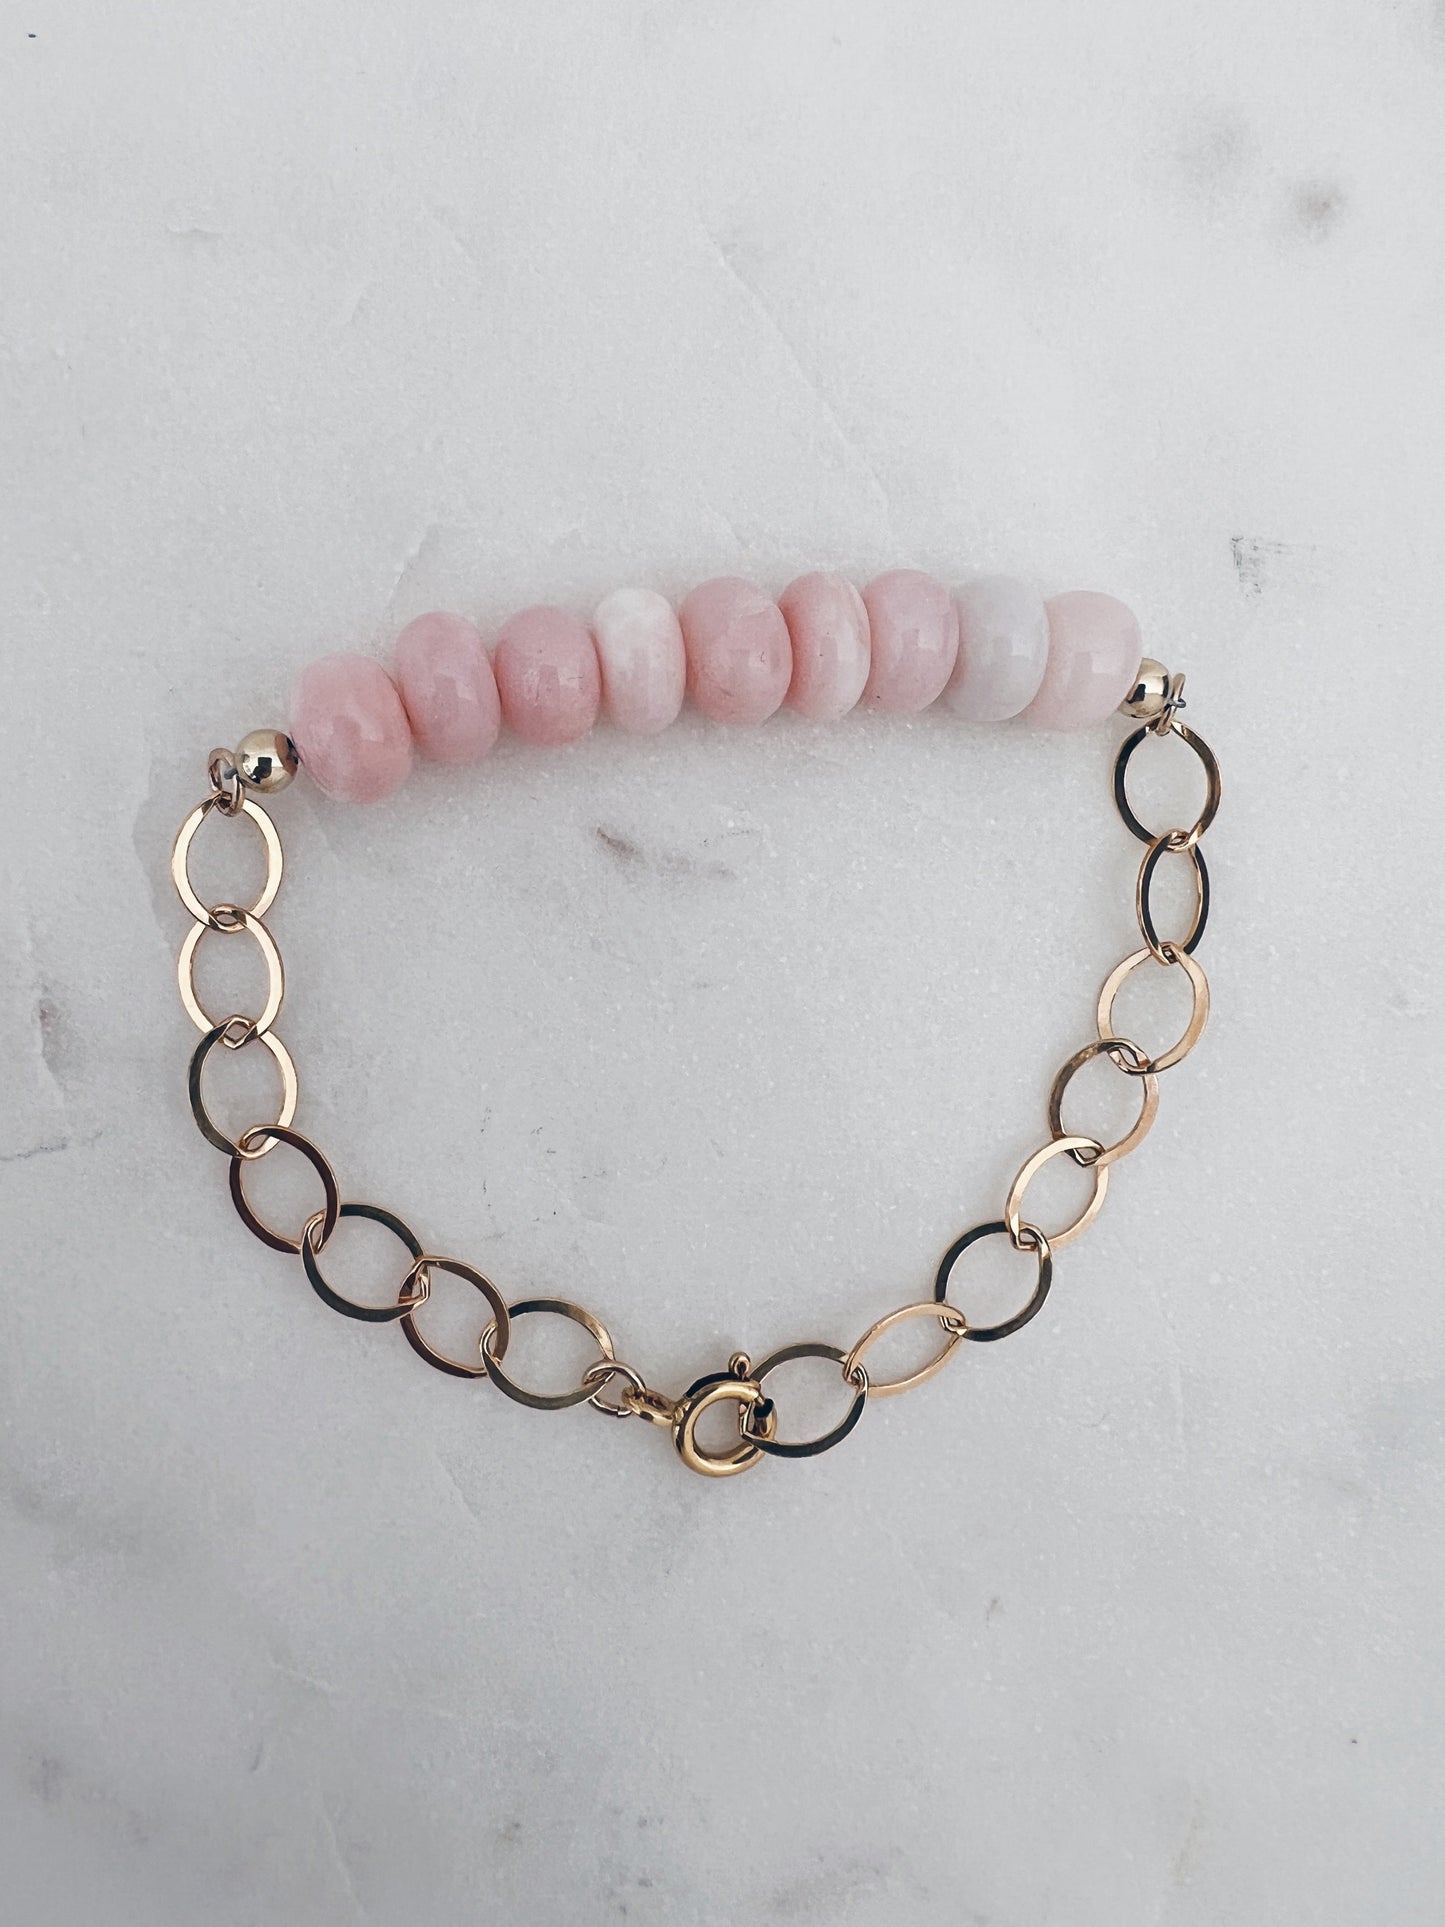 14k Gold Filled Opal and Chain Bracelet + More Options